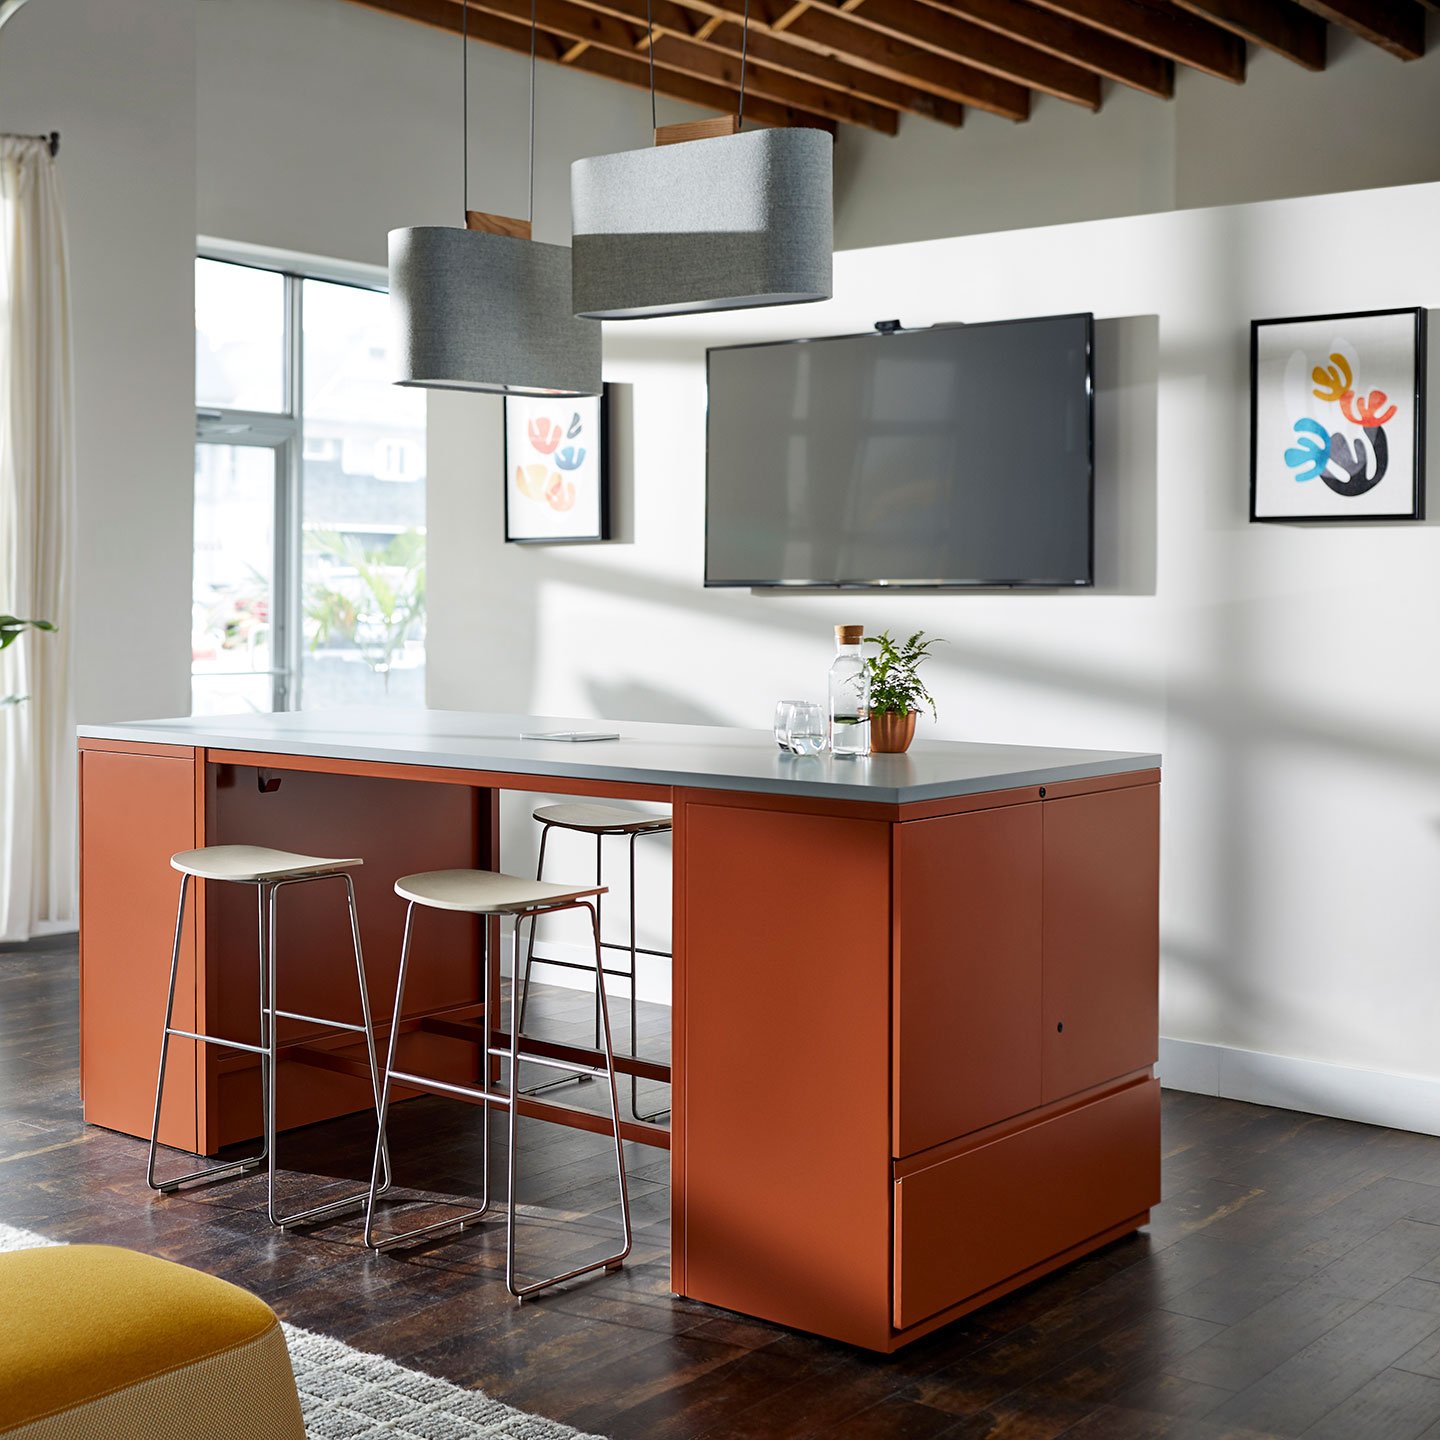 Haworth Belmont Lighting in grey color in office lounge space with orange desk and high chairs with tv on wall